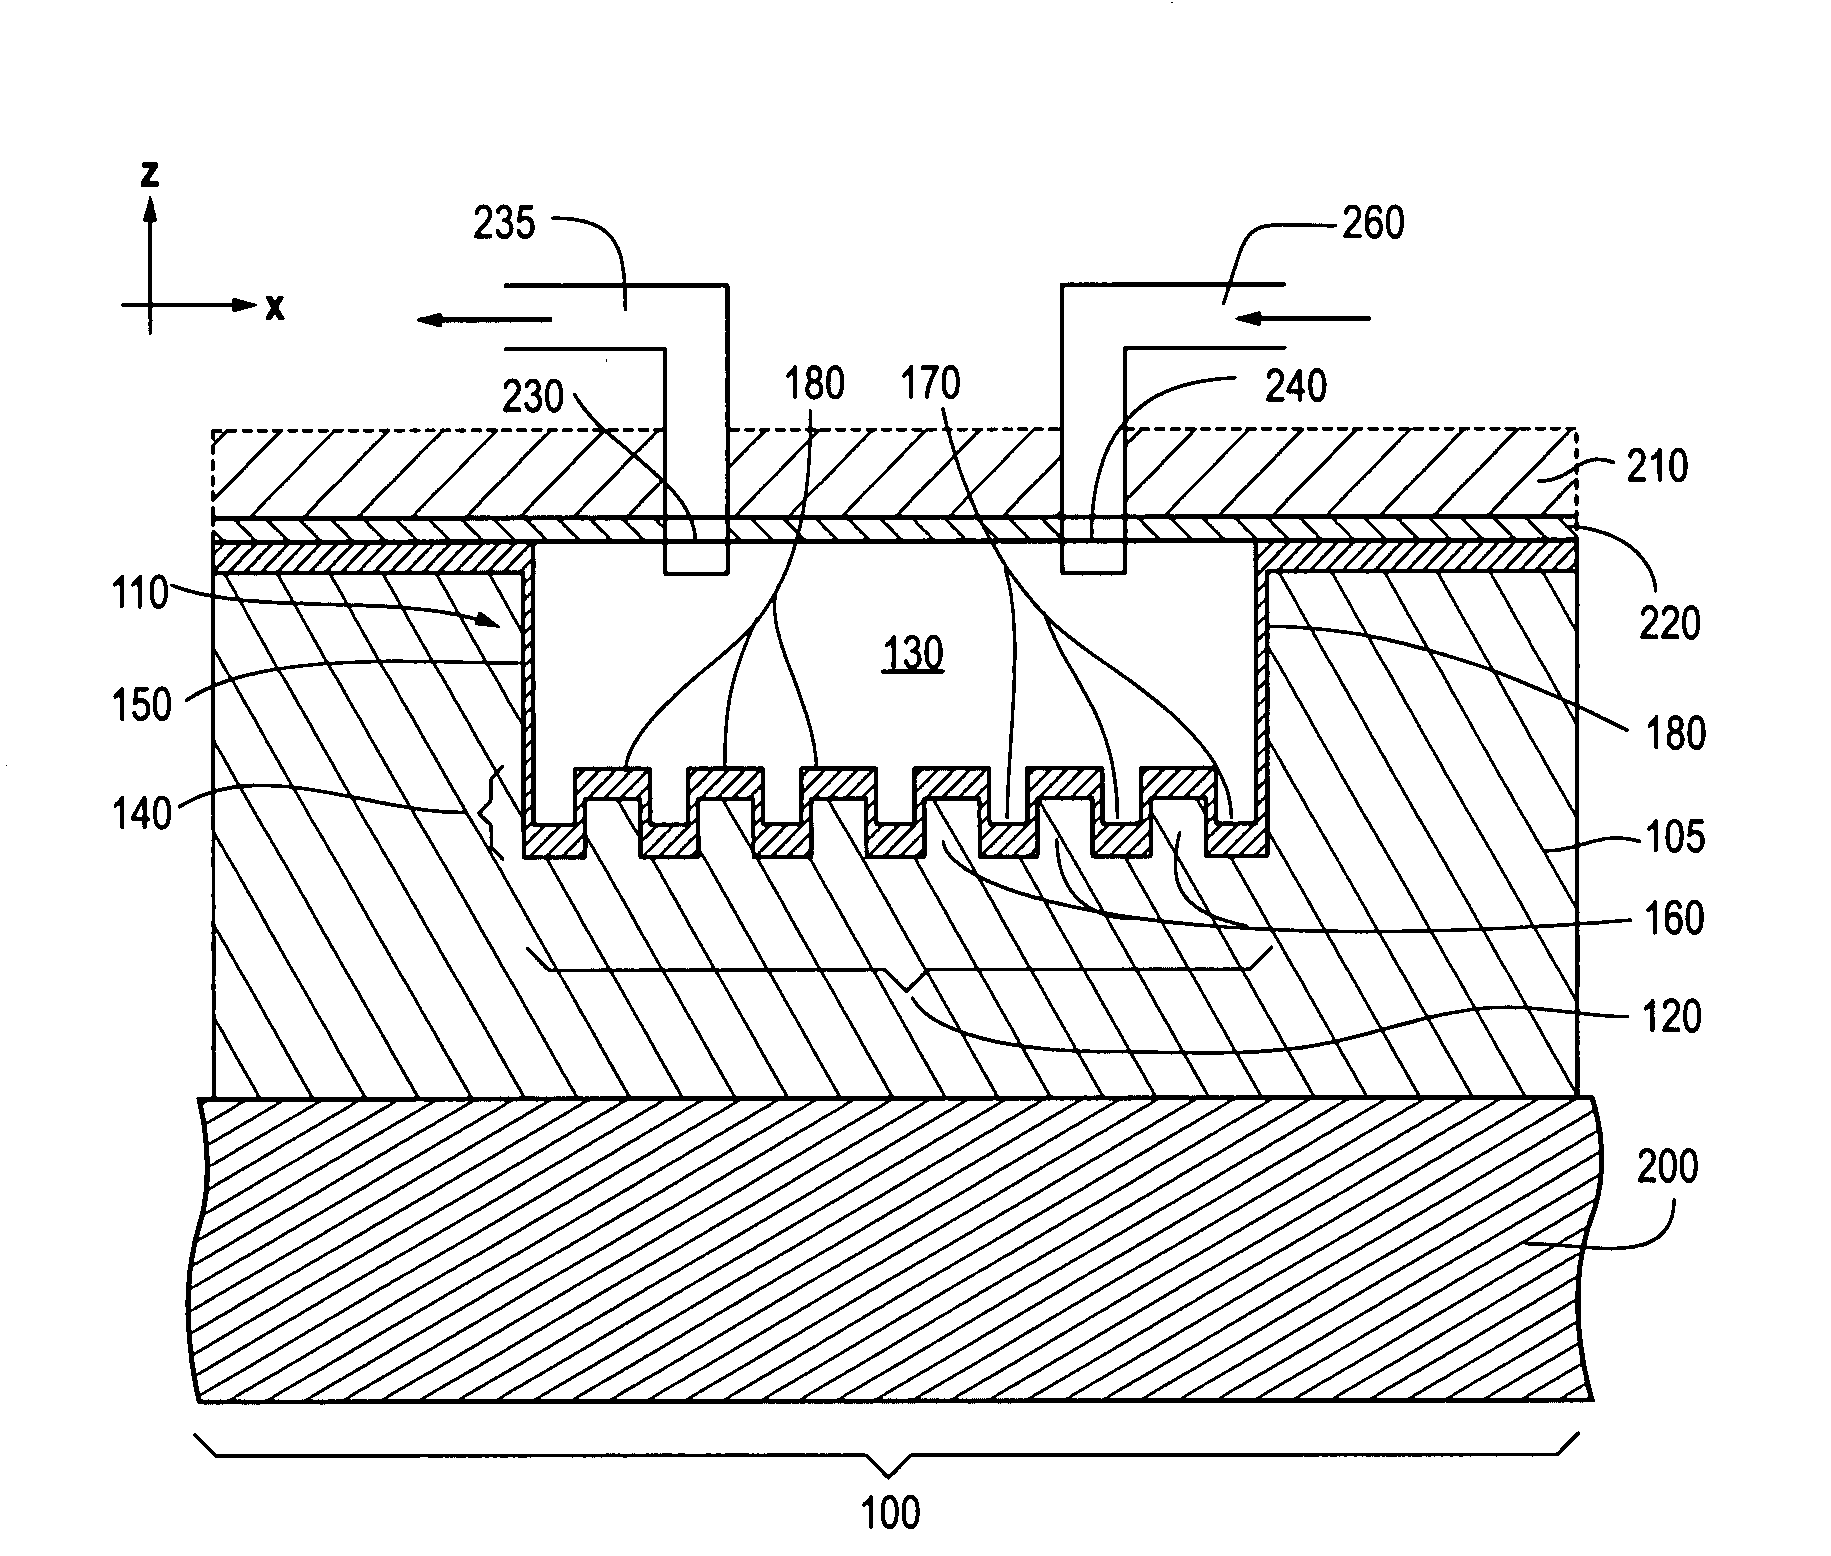 Photonic crystal sensors with intergrated fluid containment structure